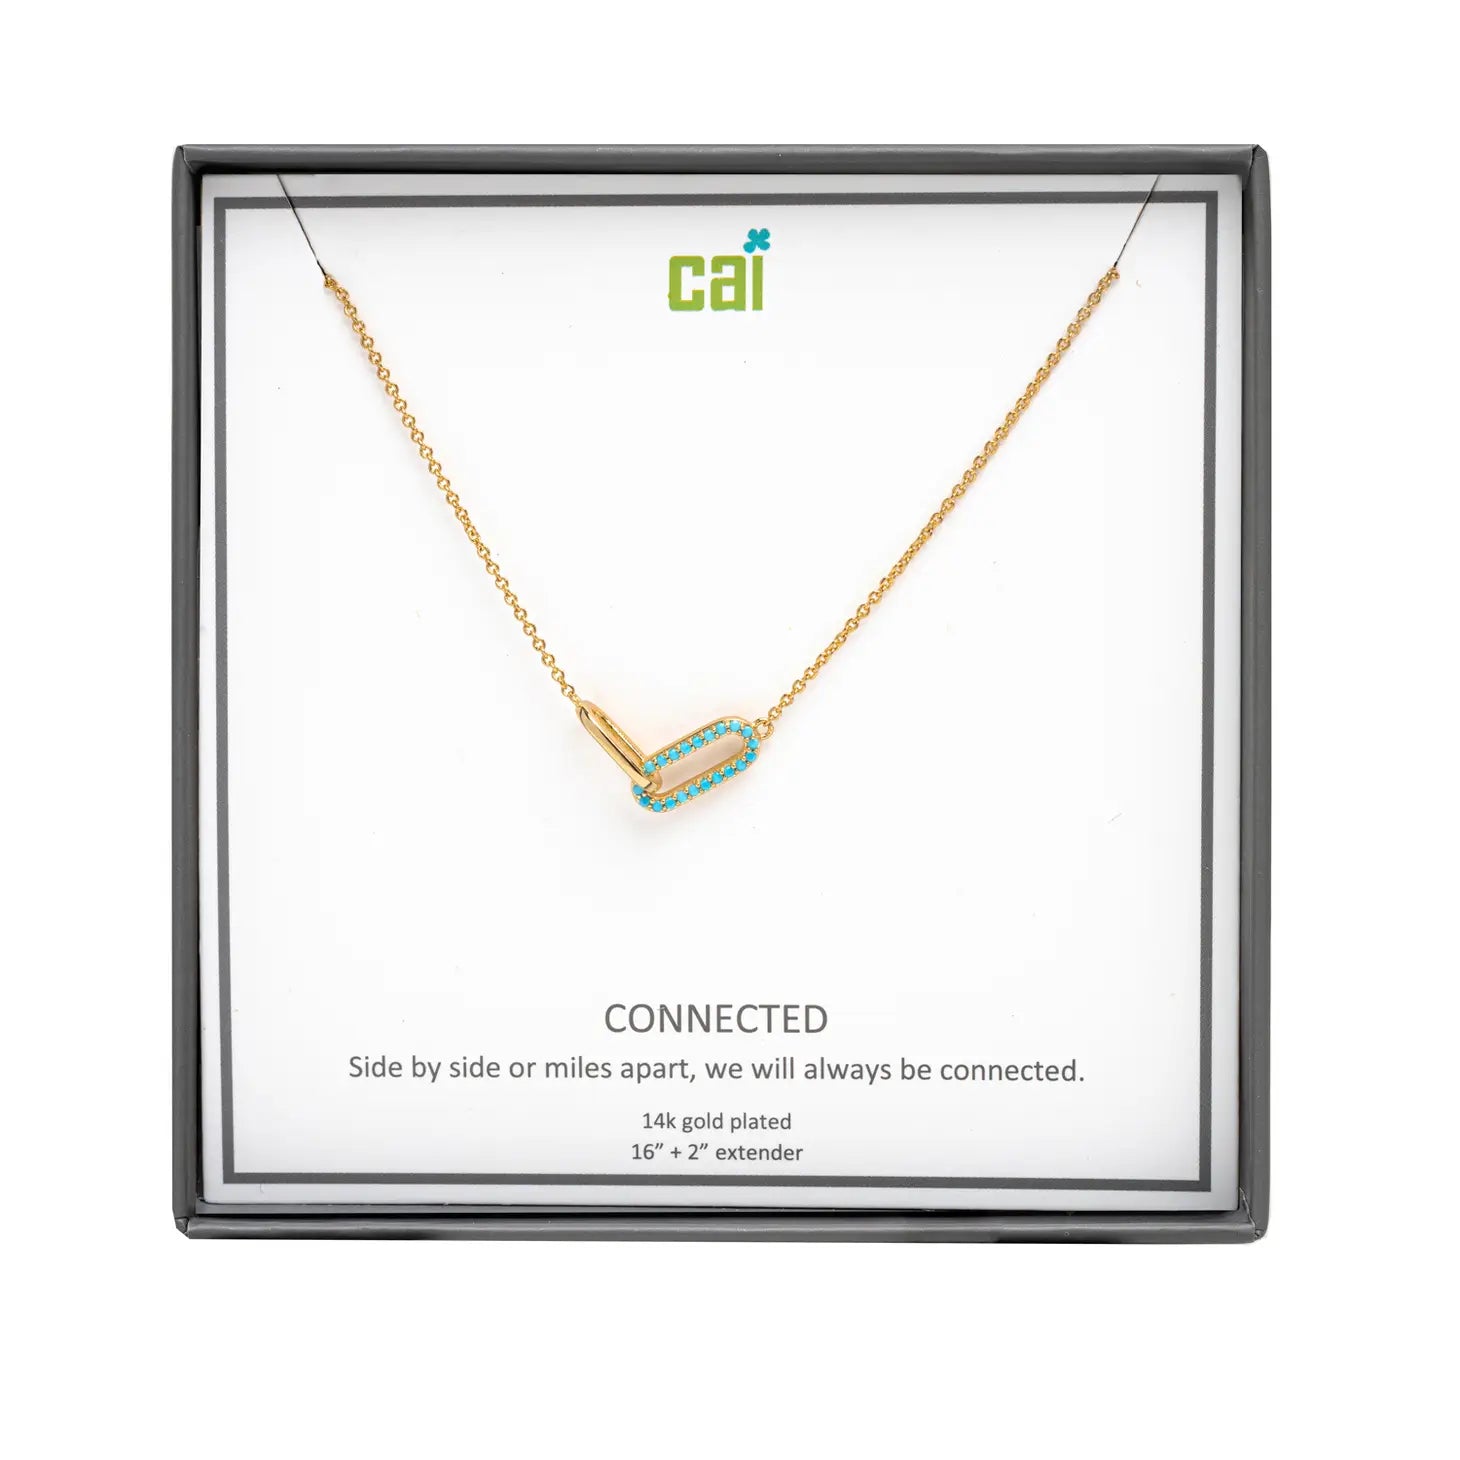 C&I | Be Connected